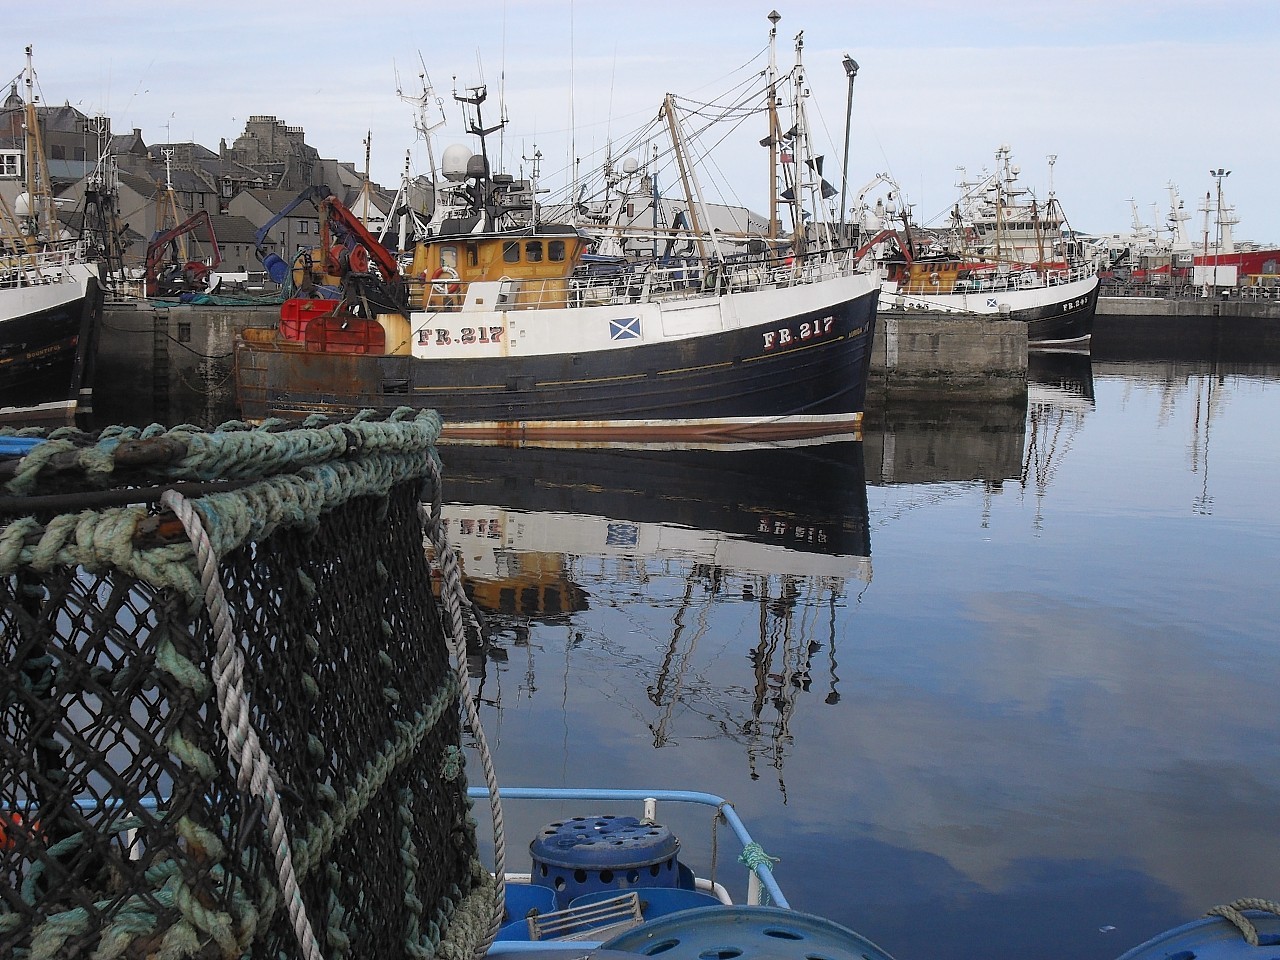 Fishing boats at Fraserburgh harbour